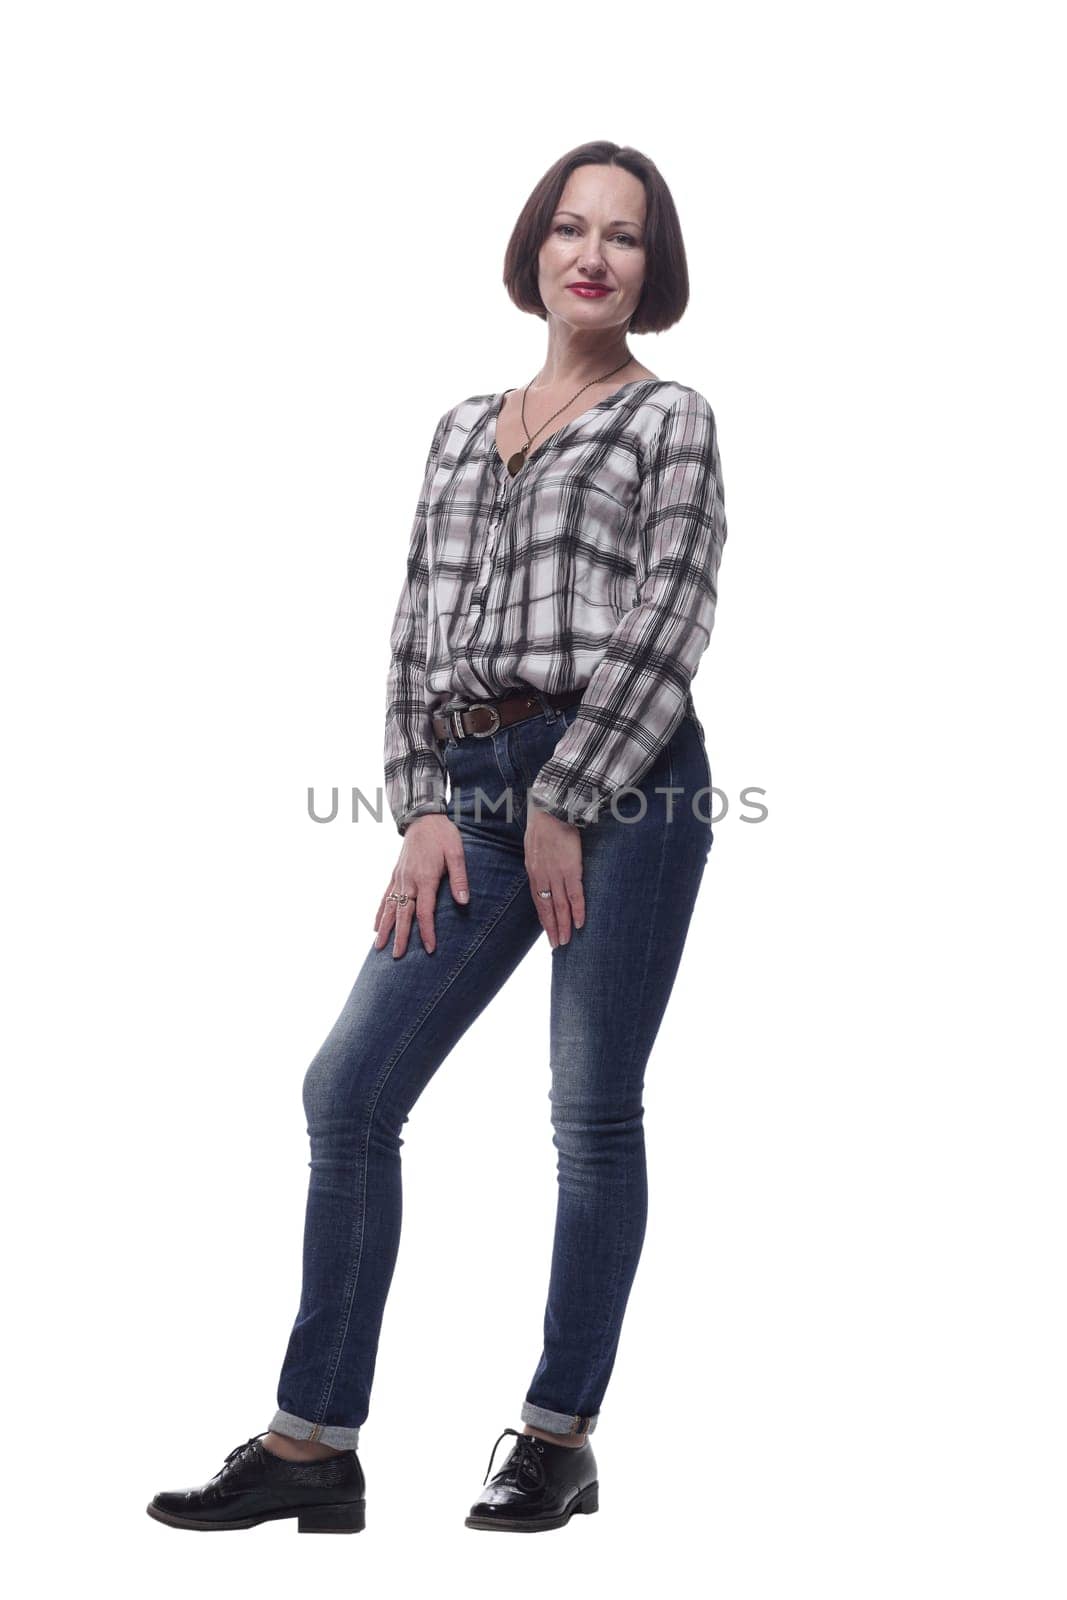 in full growth. attractive mature woman looking at the camera. isolated on a white background.